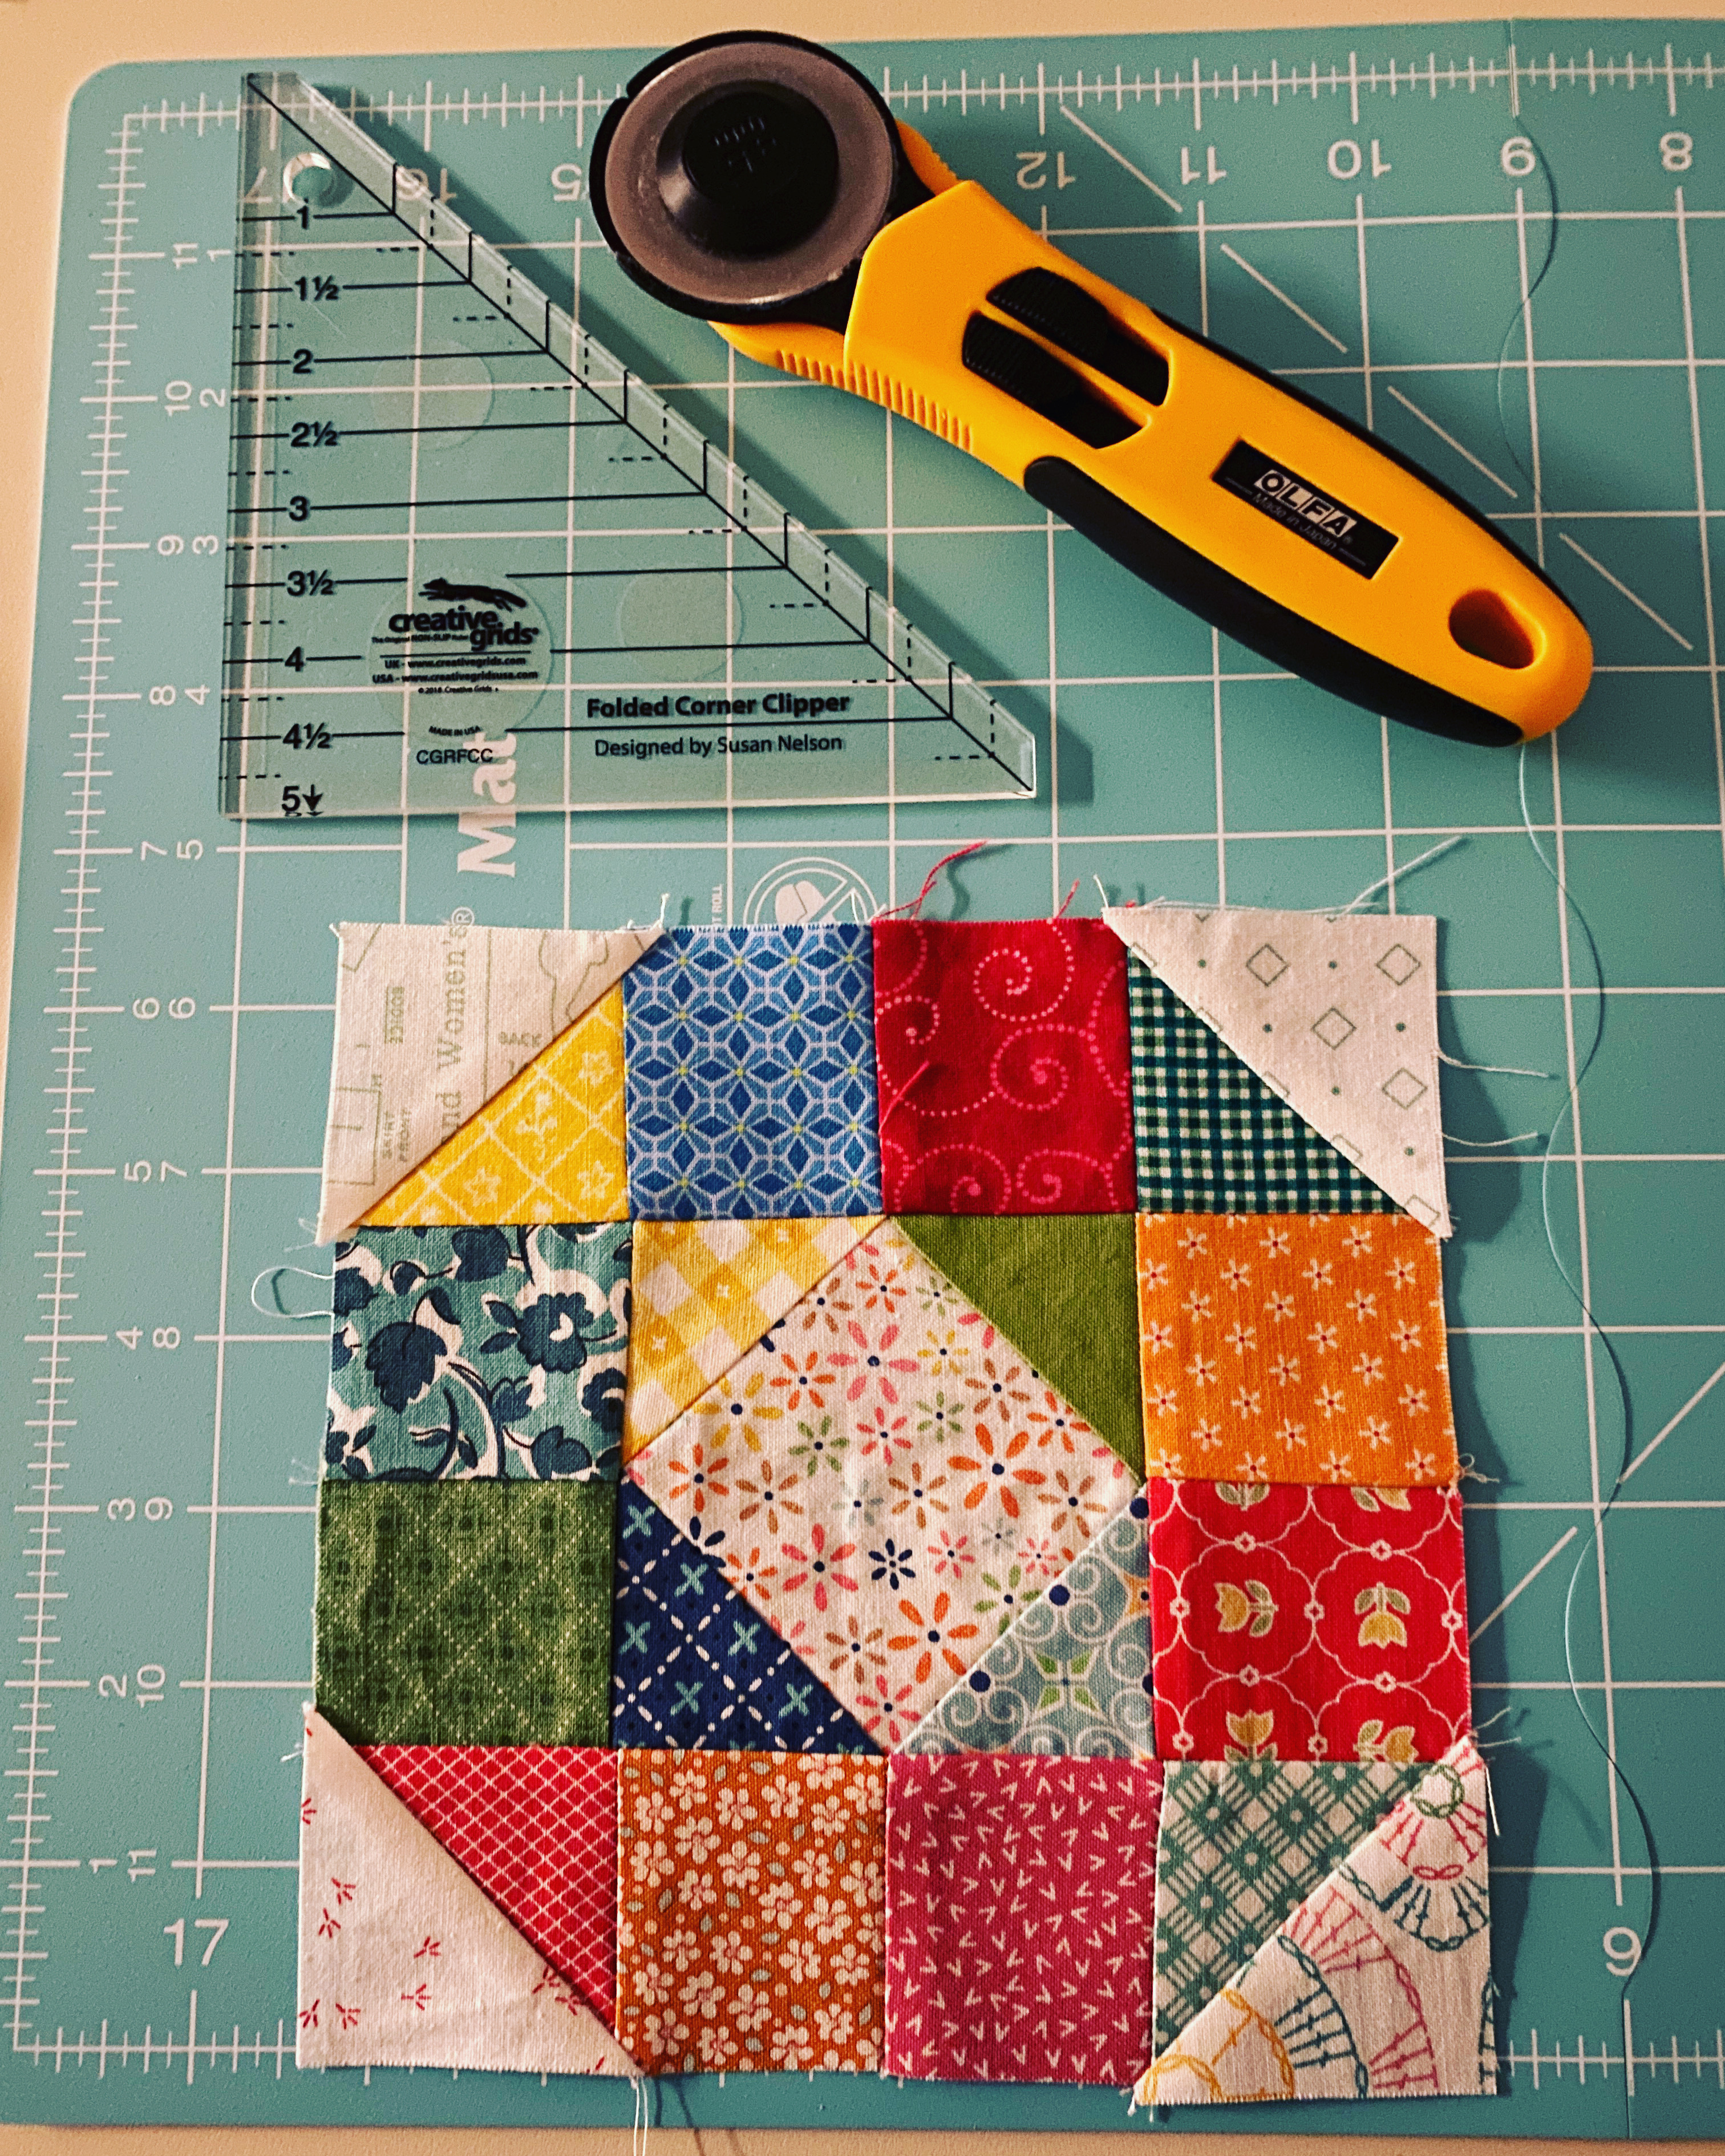 SCRAPPINESS is HAPPINESS Quilt Book by Lori Holt 32 